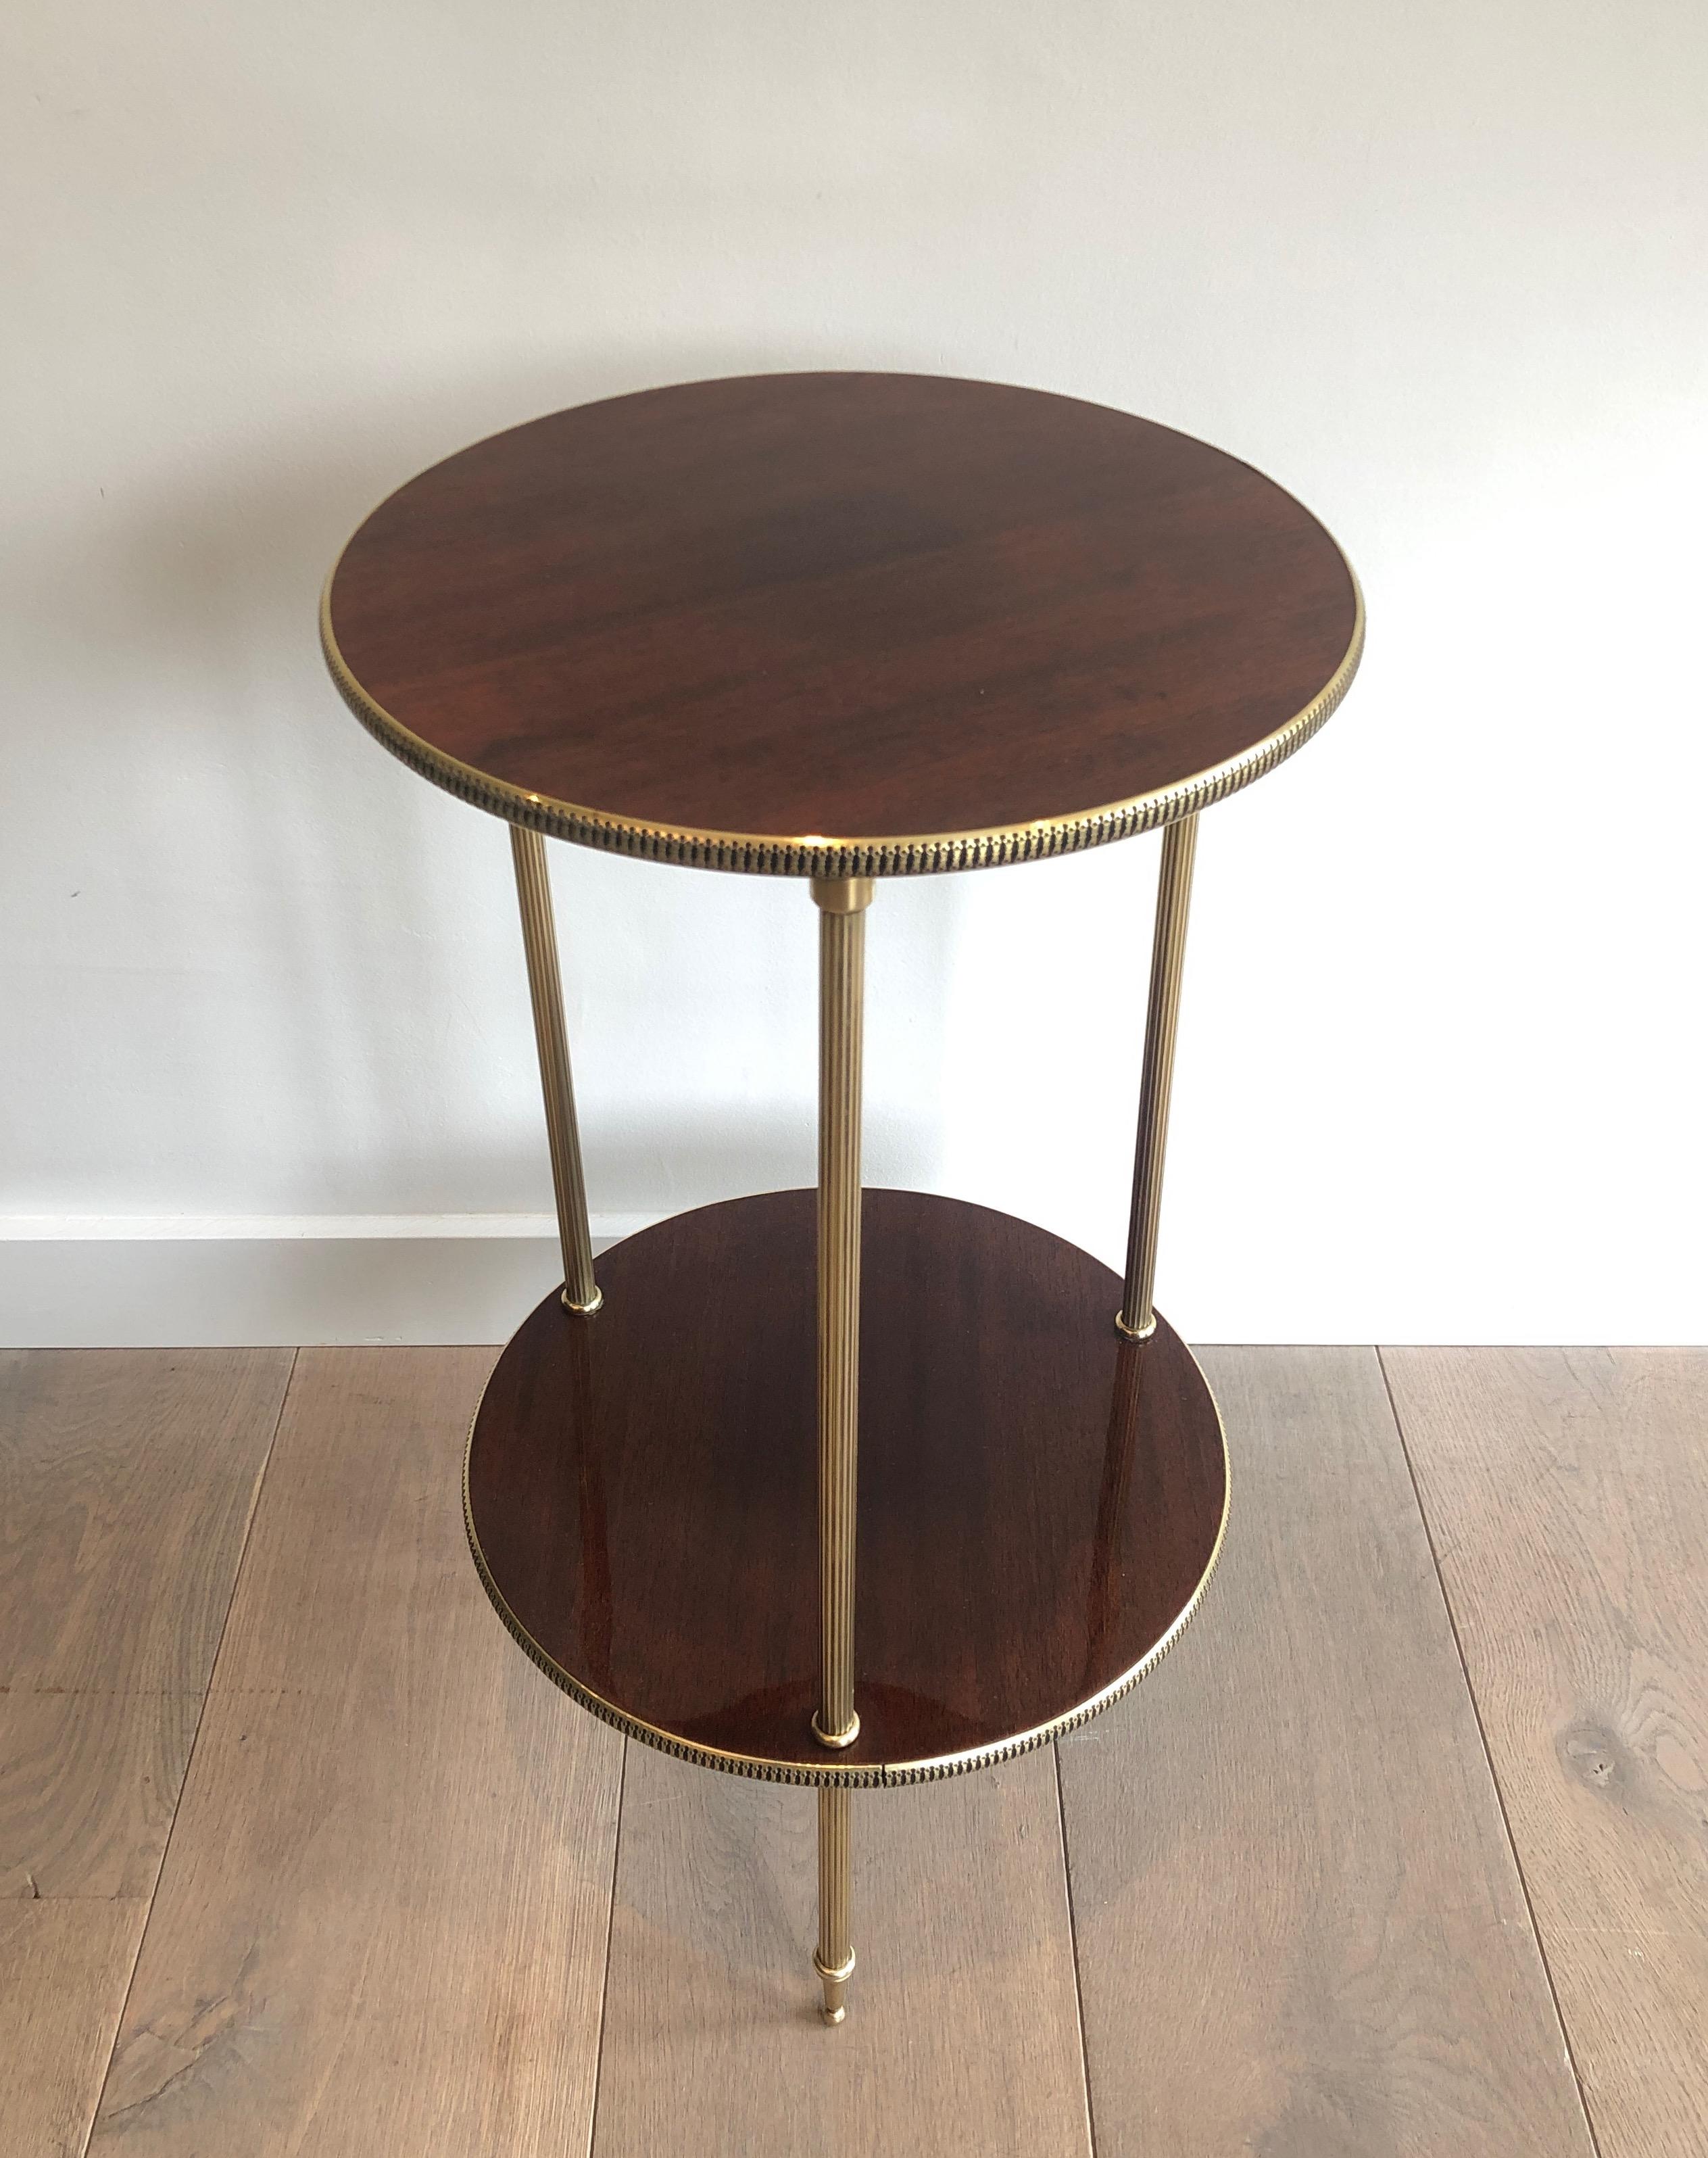 Neoclassical Round Mahogany and Brass Side Table, French, circa 1950